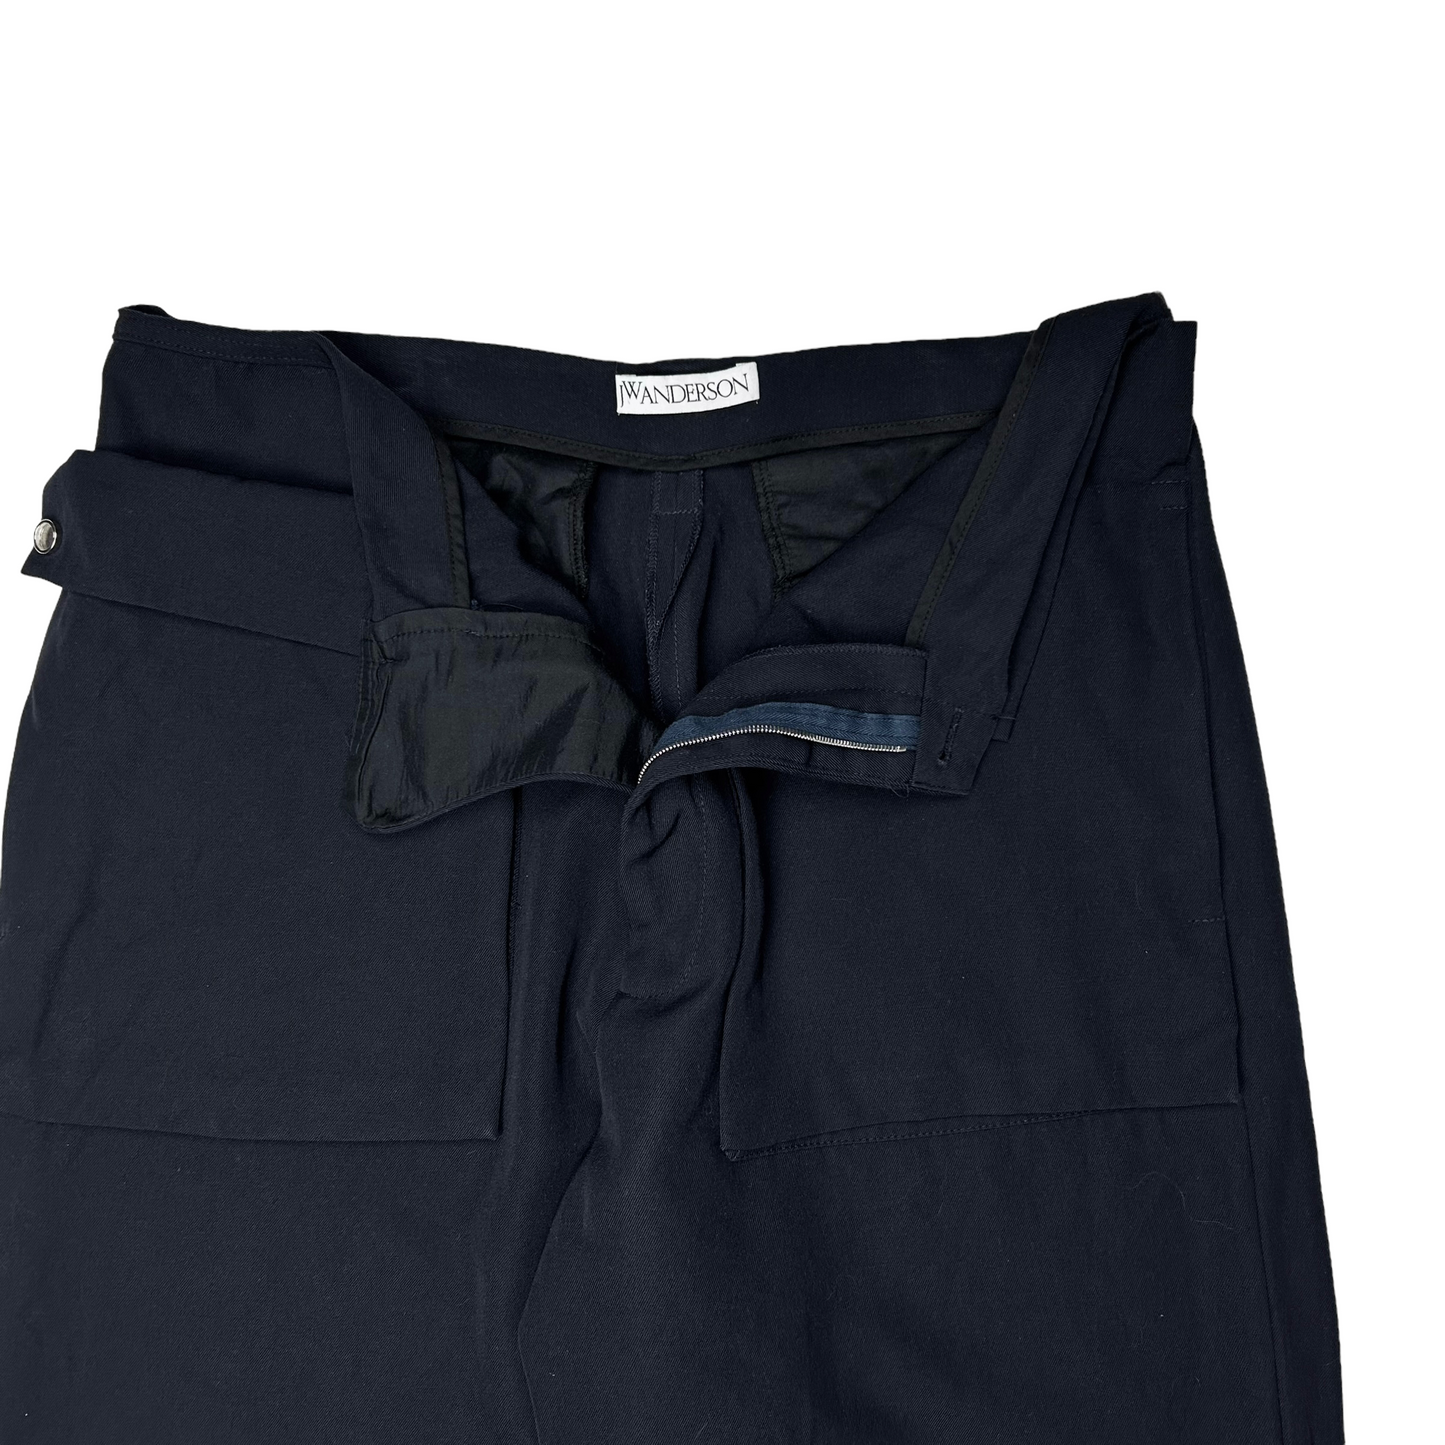 JW Anderson Large Pocket Trousers - SS20